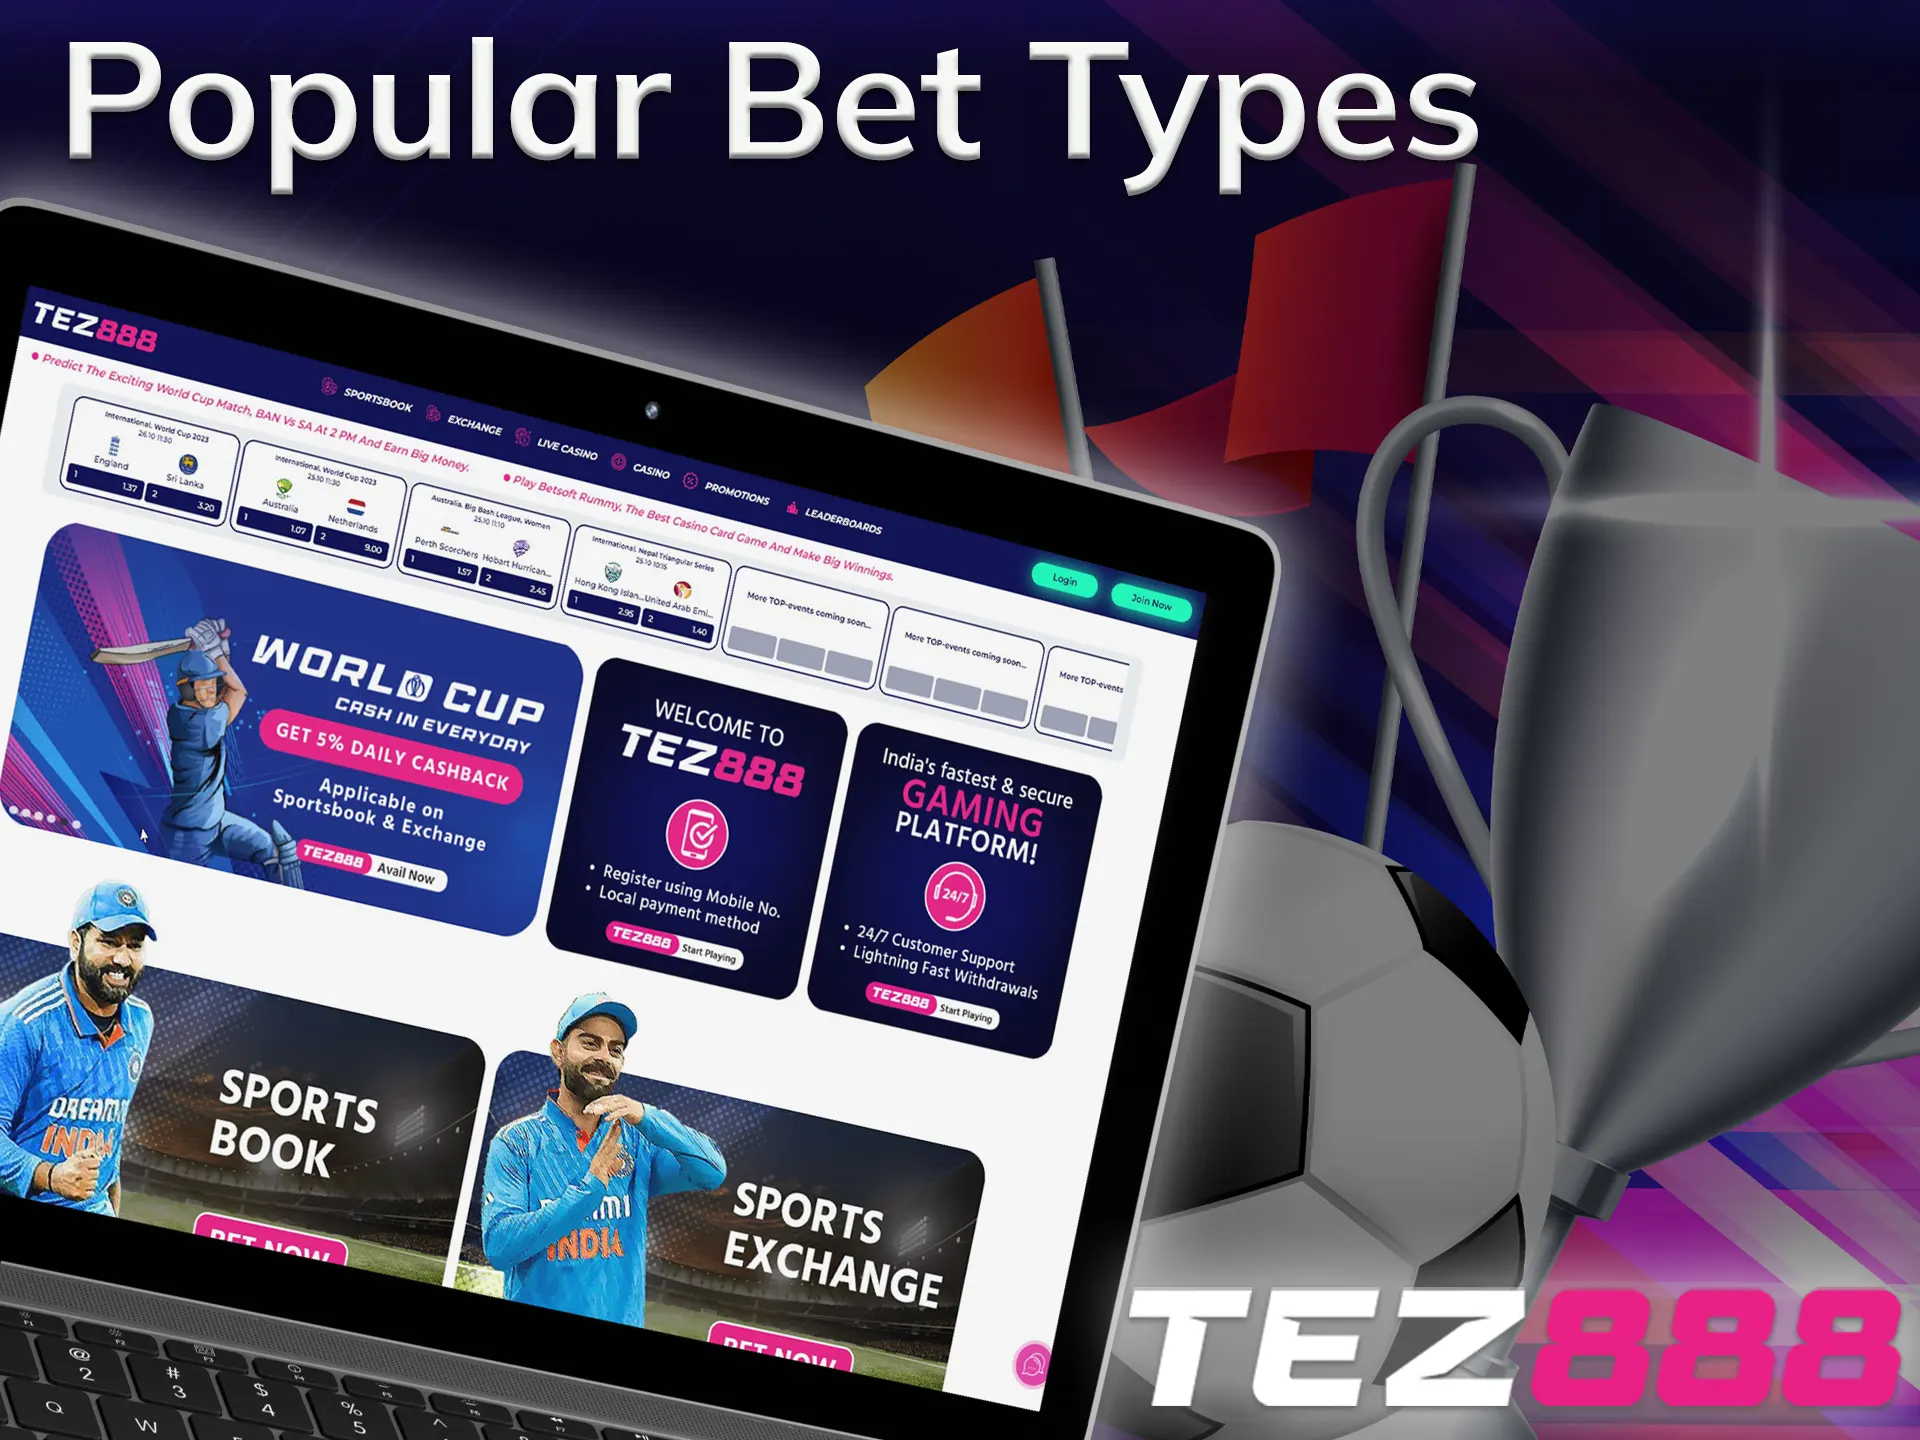 Familiarise yourself with the most popular types of betting at tez888.